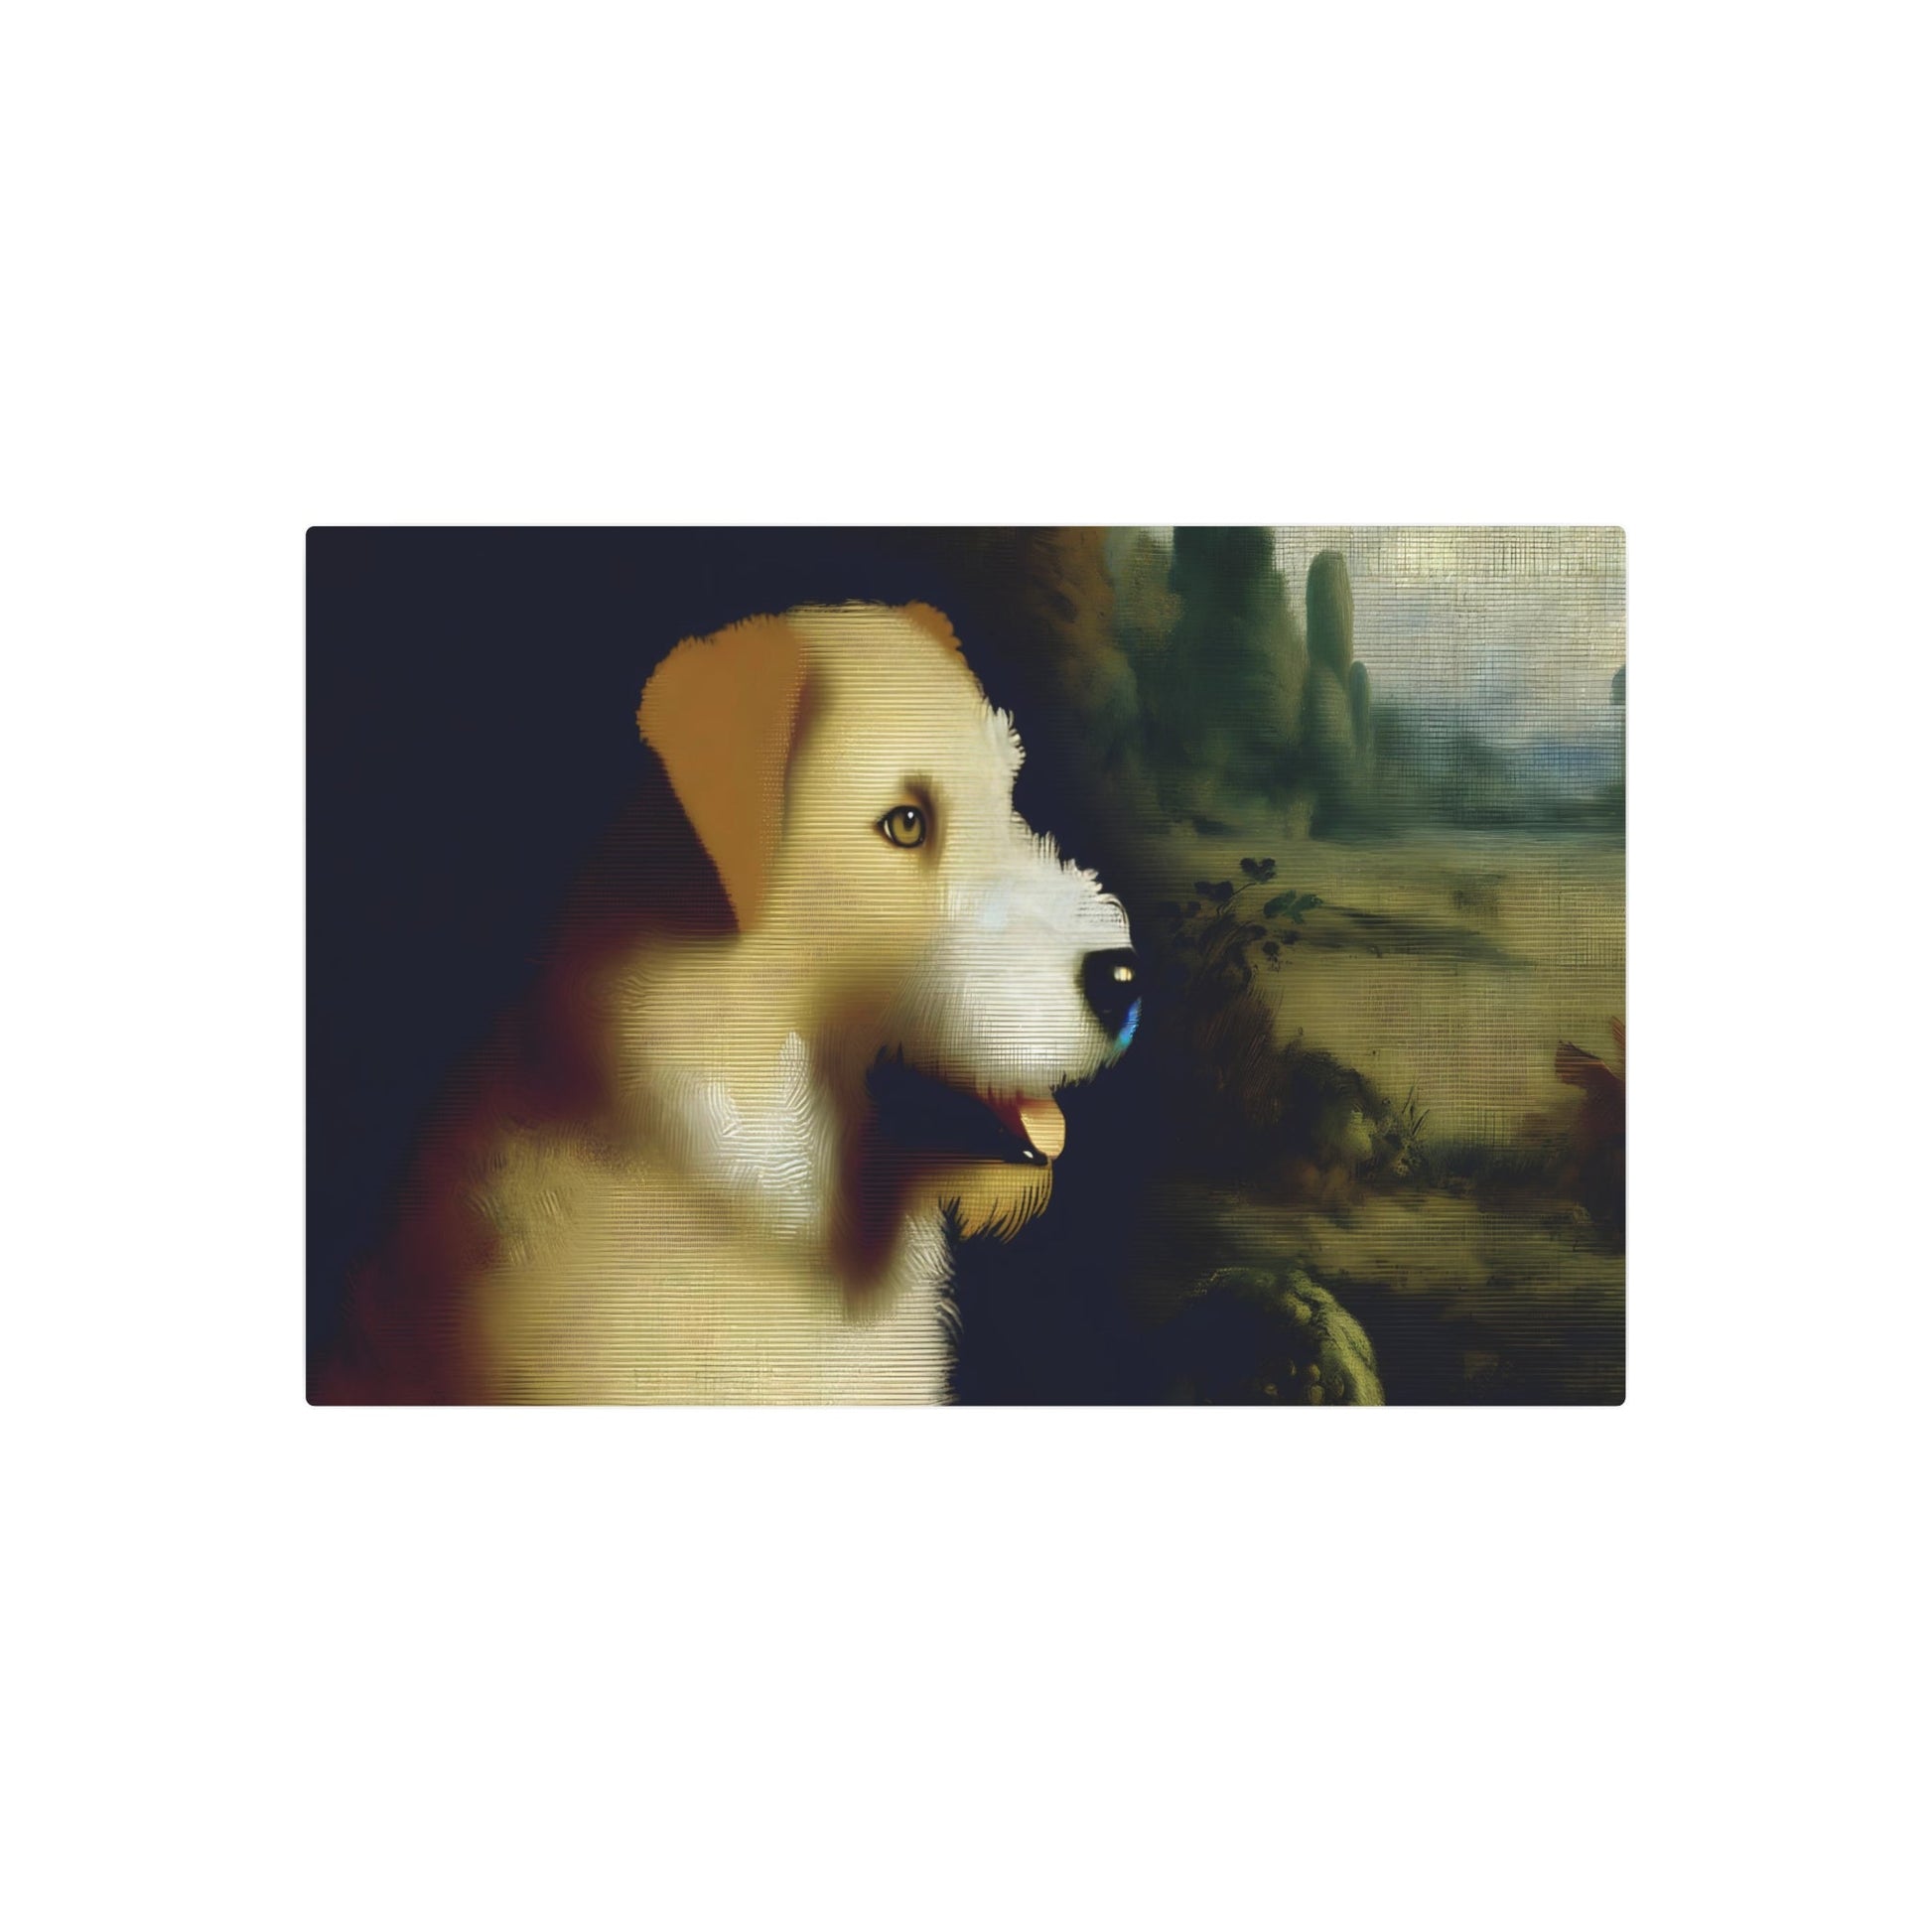 Metal Poster Art | "Neoclassical Art Dog Painting in Detailed Jacques-Louis David Style - Western Neoclassicism Masterpiece" - Metal Poster Art 36″ x 24″ (Horizontal) 0.12''